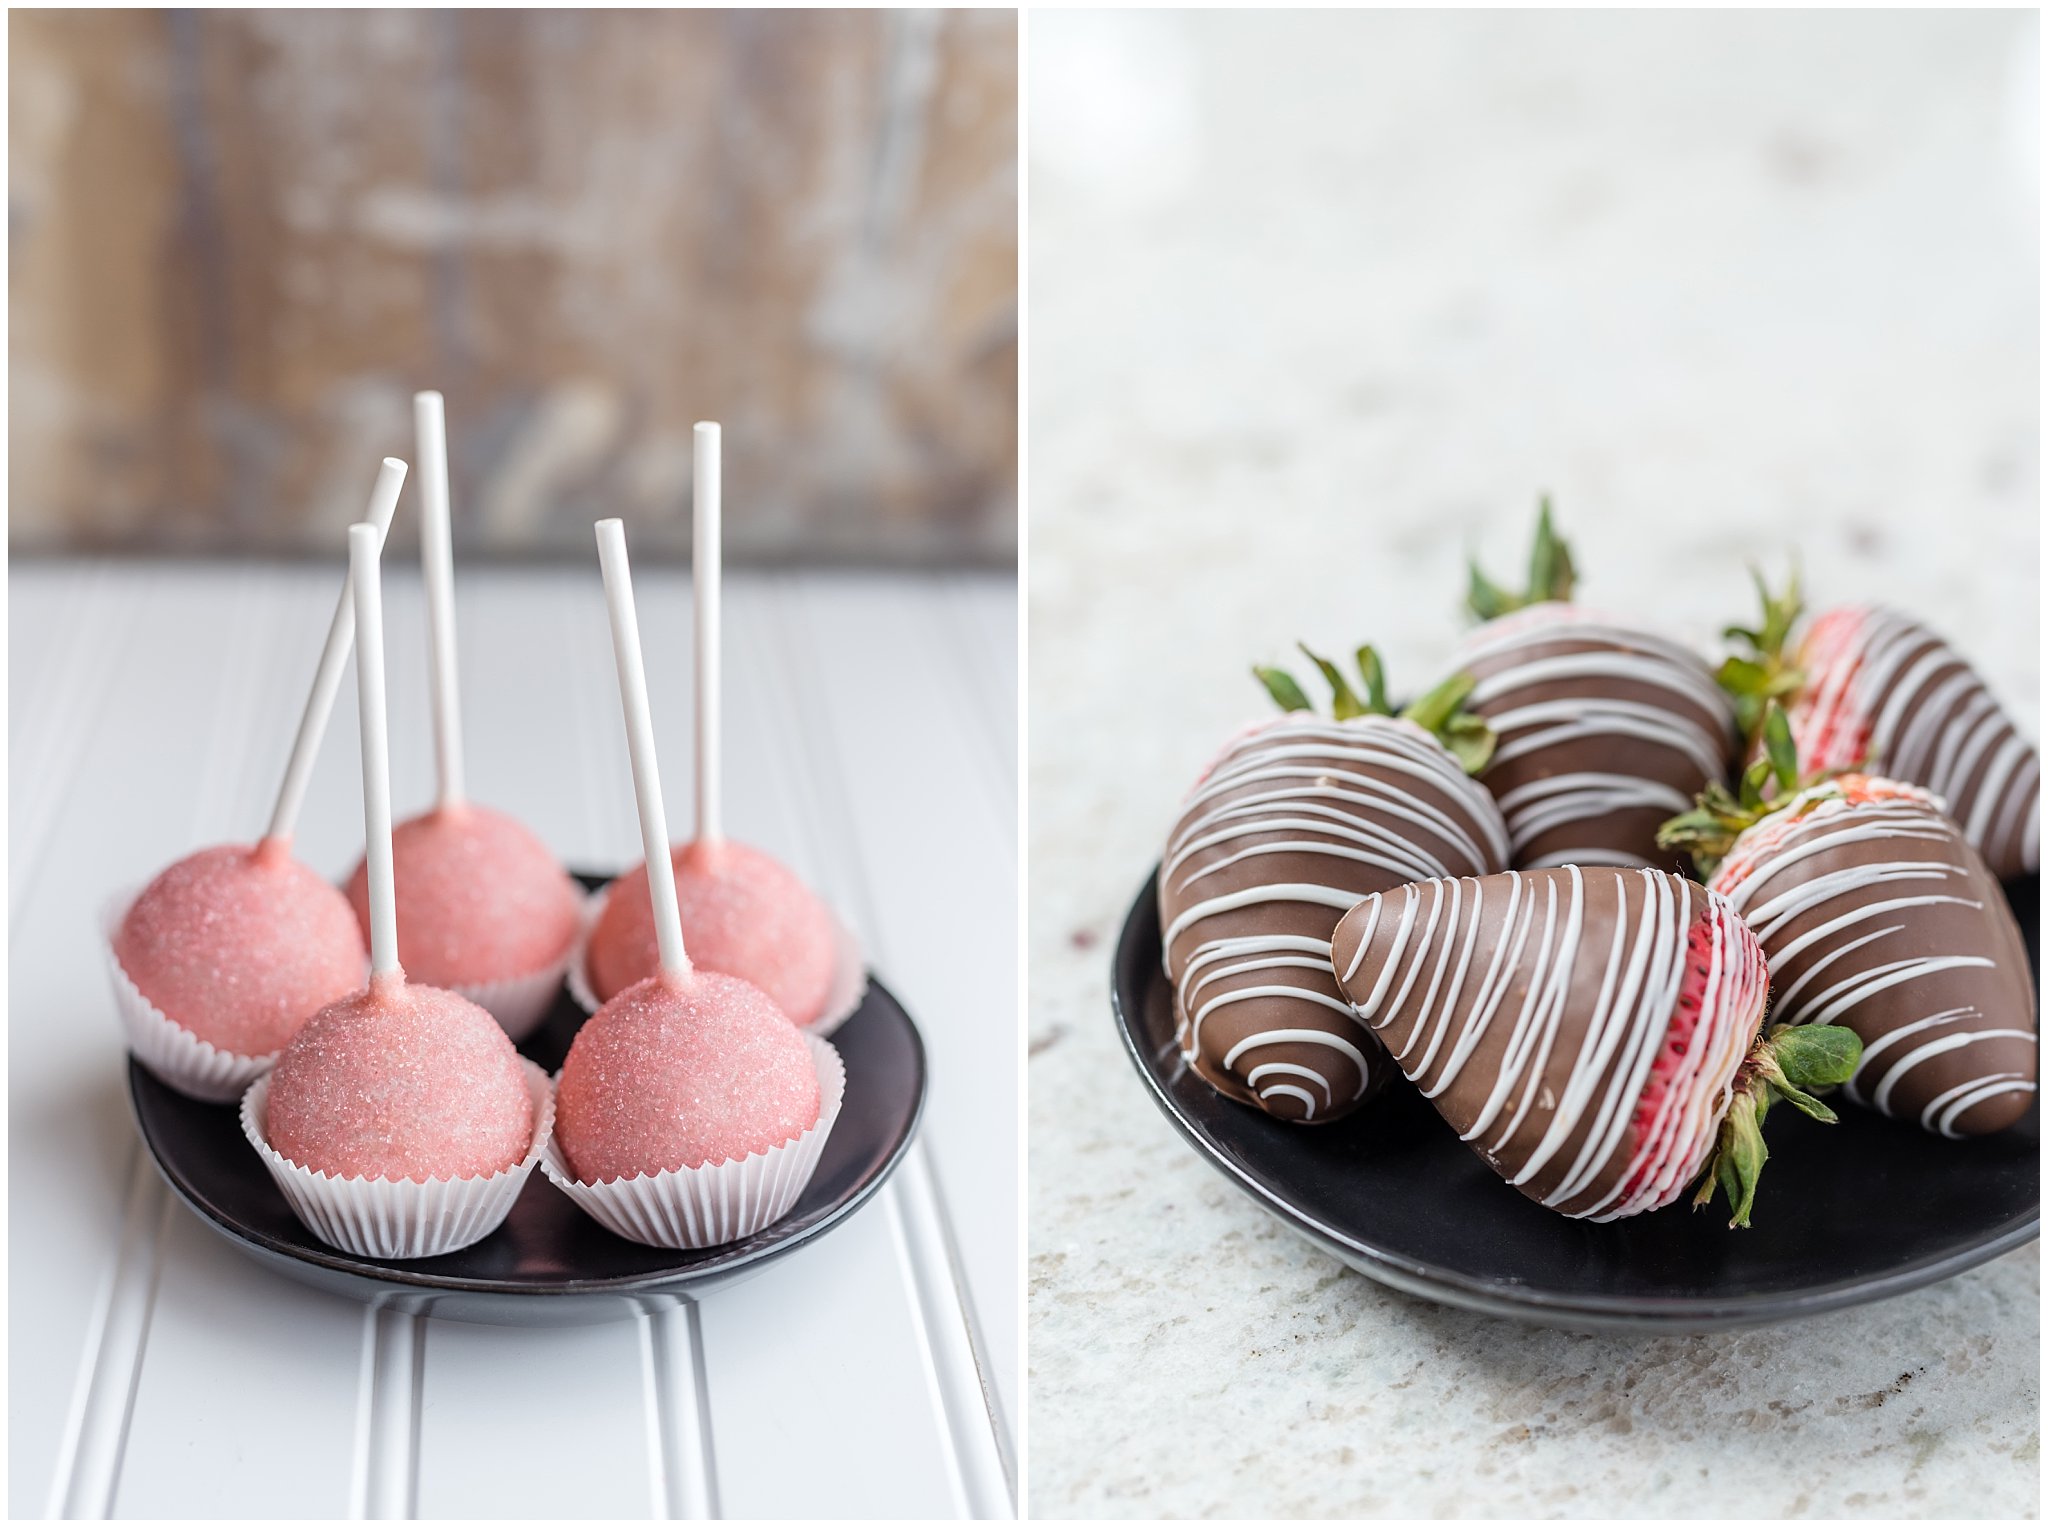 Cake pops and chocolate cover strawberries | Wedding treats | Sweet Cravings